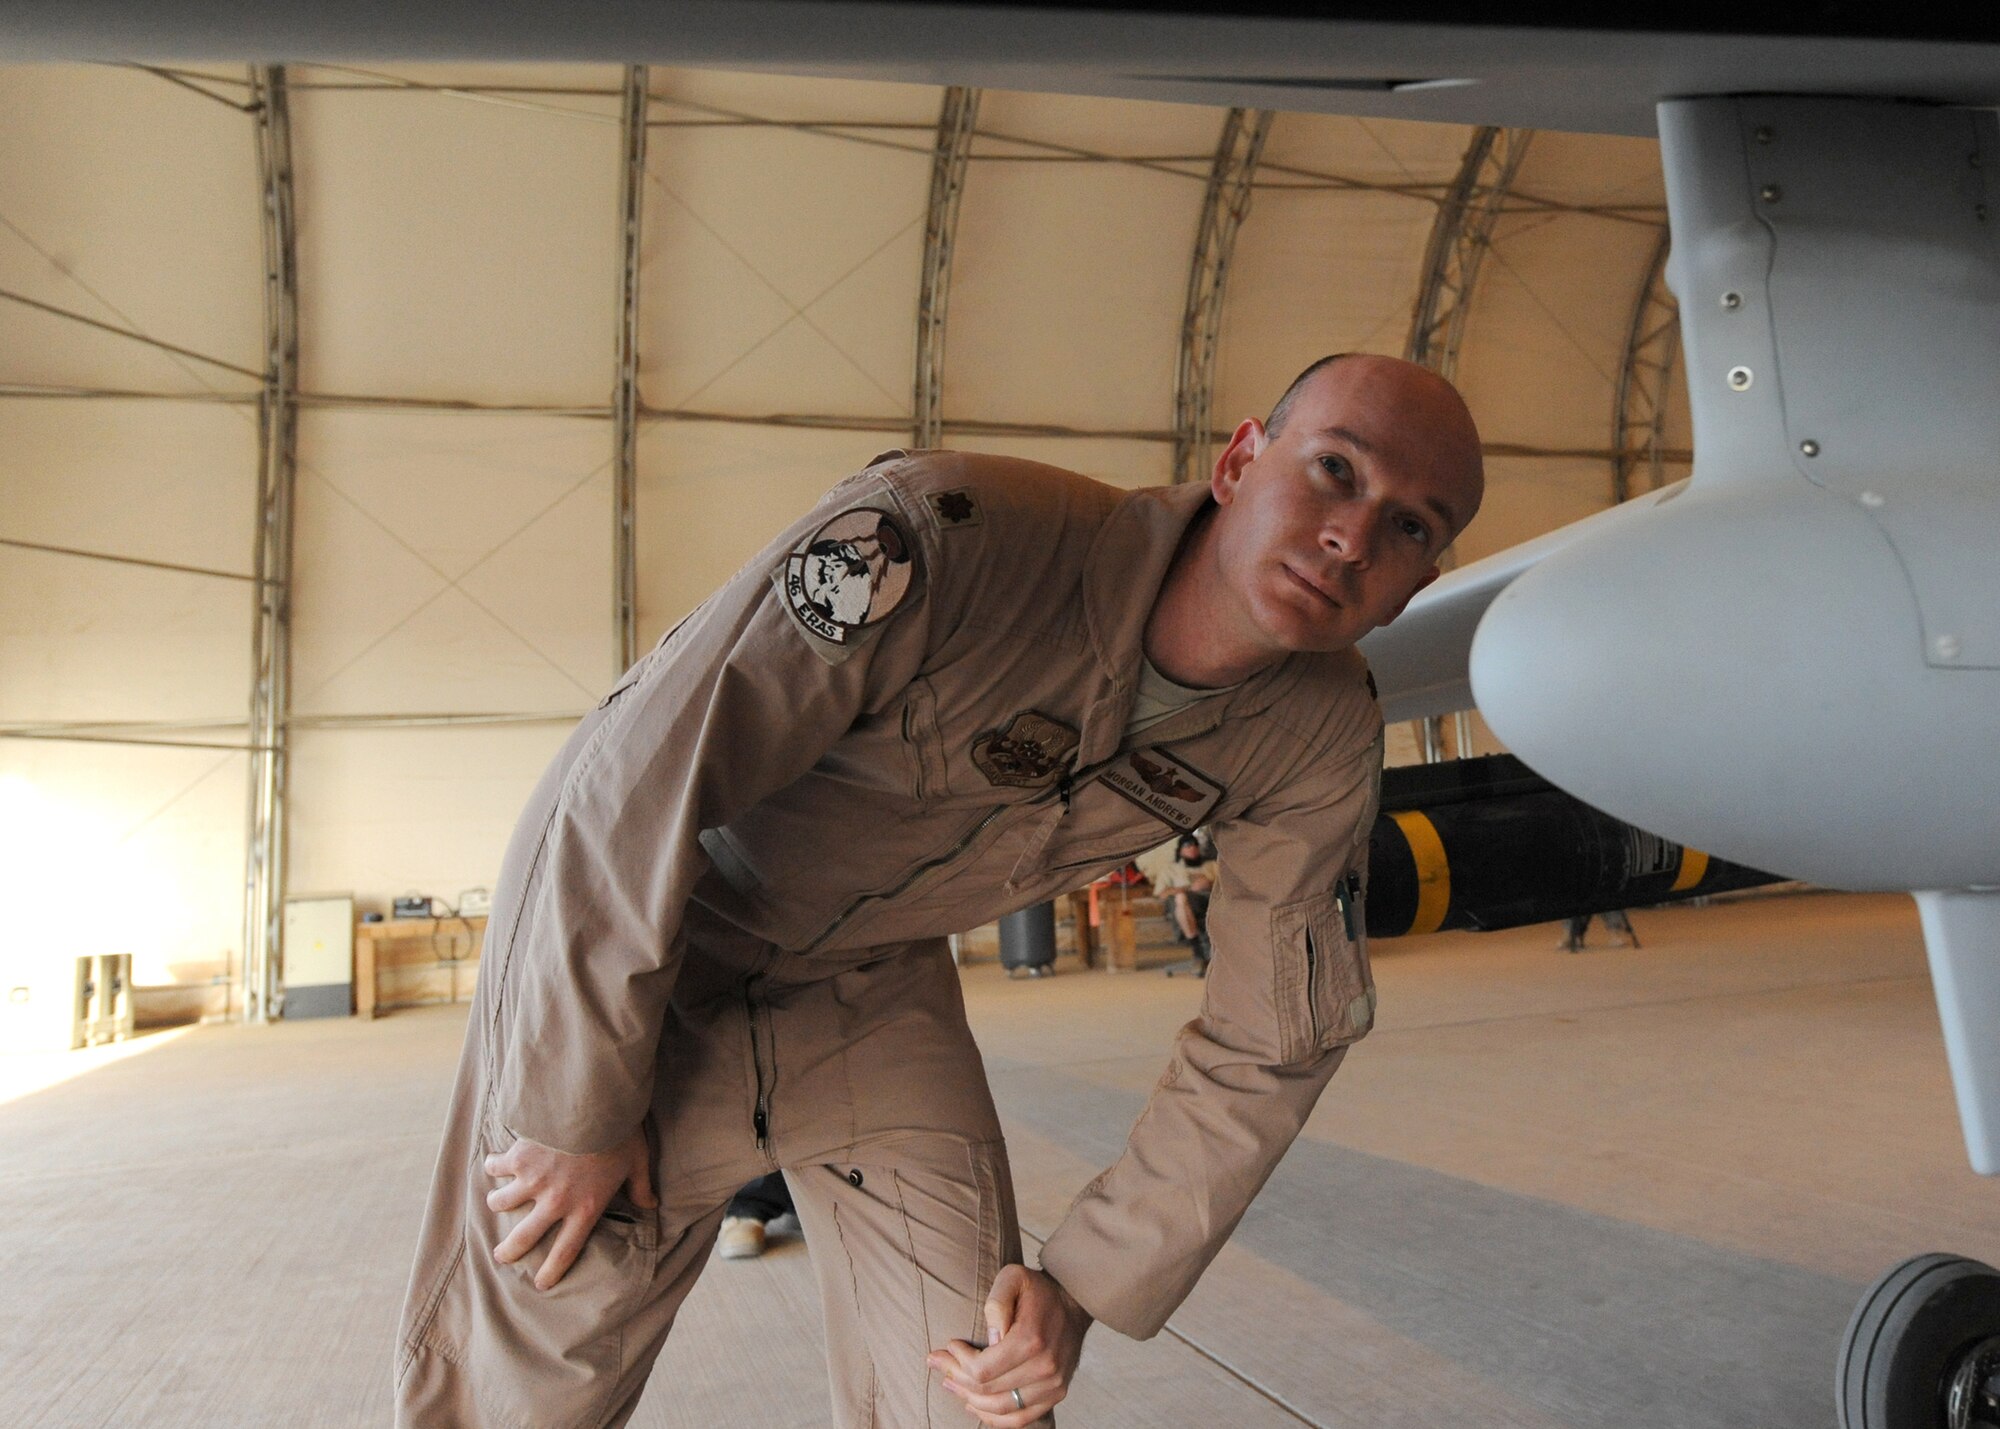 Maj. Morgan Andrews, the 46th Reconnaissance and Attack Squadron director of operations at Joint Base Balad, Iraq, inspects an unmanned MQ-1 Predator before its first flight from the base Feb. 13.  The Predator system is made up of the ground-control system, a satellite link, personnel and the aircraft.  Major Andrews is deployed from Creech Air Force Base, Nev. (U.S. Air Force photo/Senior Airman Tiffany Trojca)